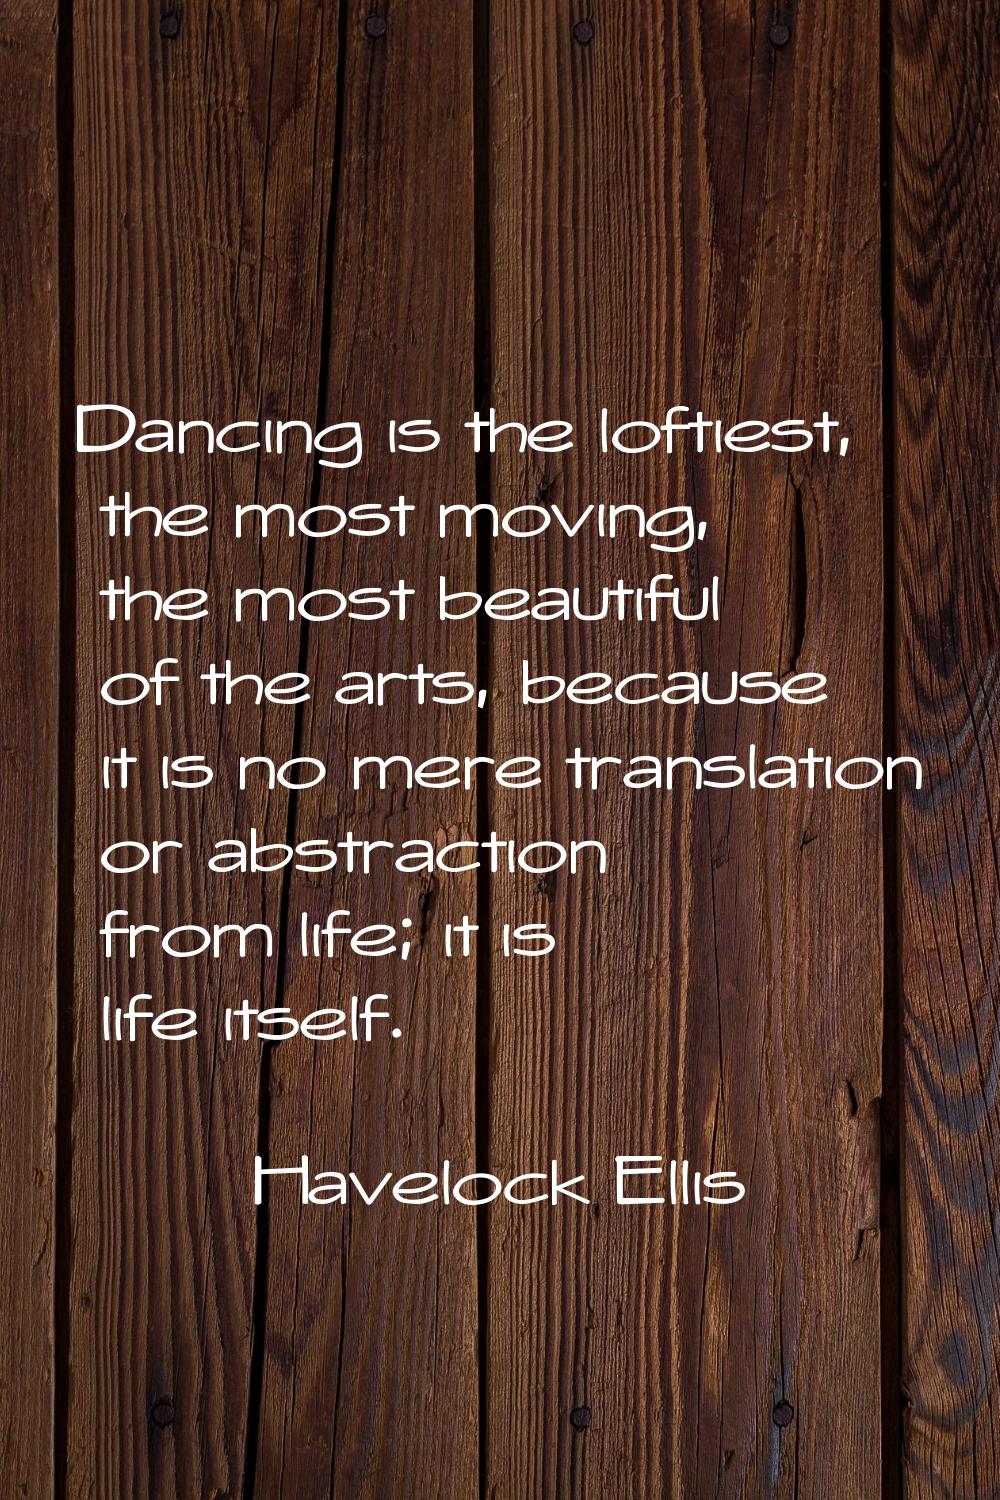 Dancing is the loftiest, the most moving, the most beautiful of the arts, because it is no mere tra